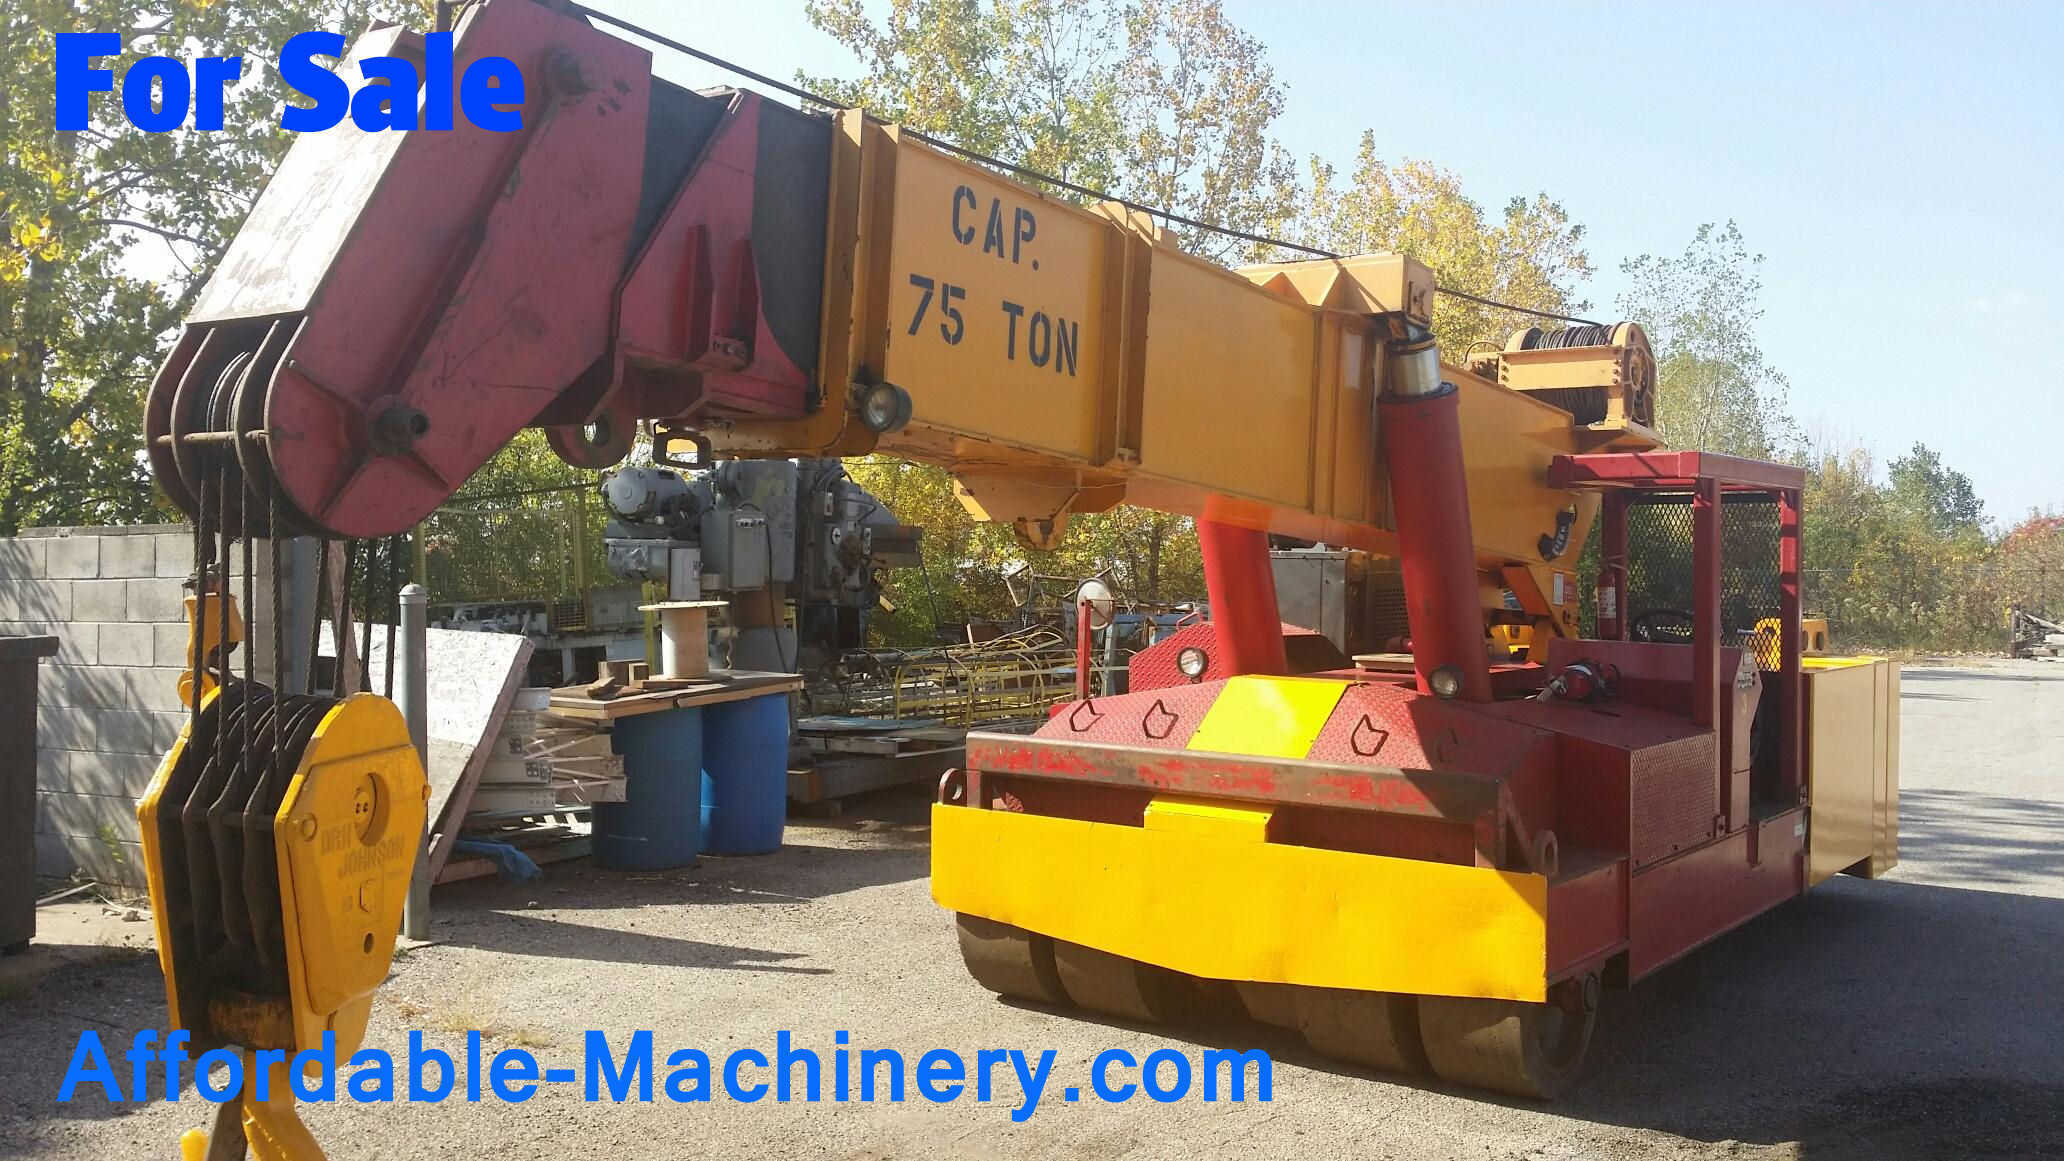 75 Ton Used Mobilift (Mobile Lift) For Sale